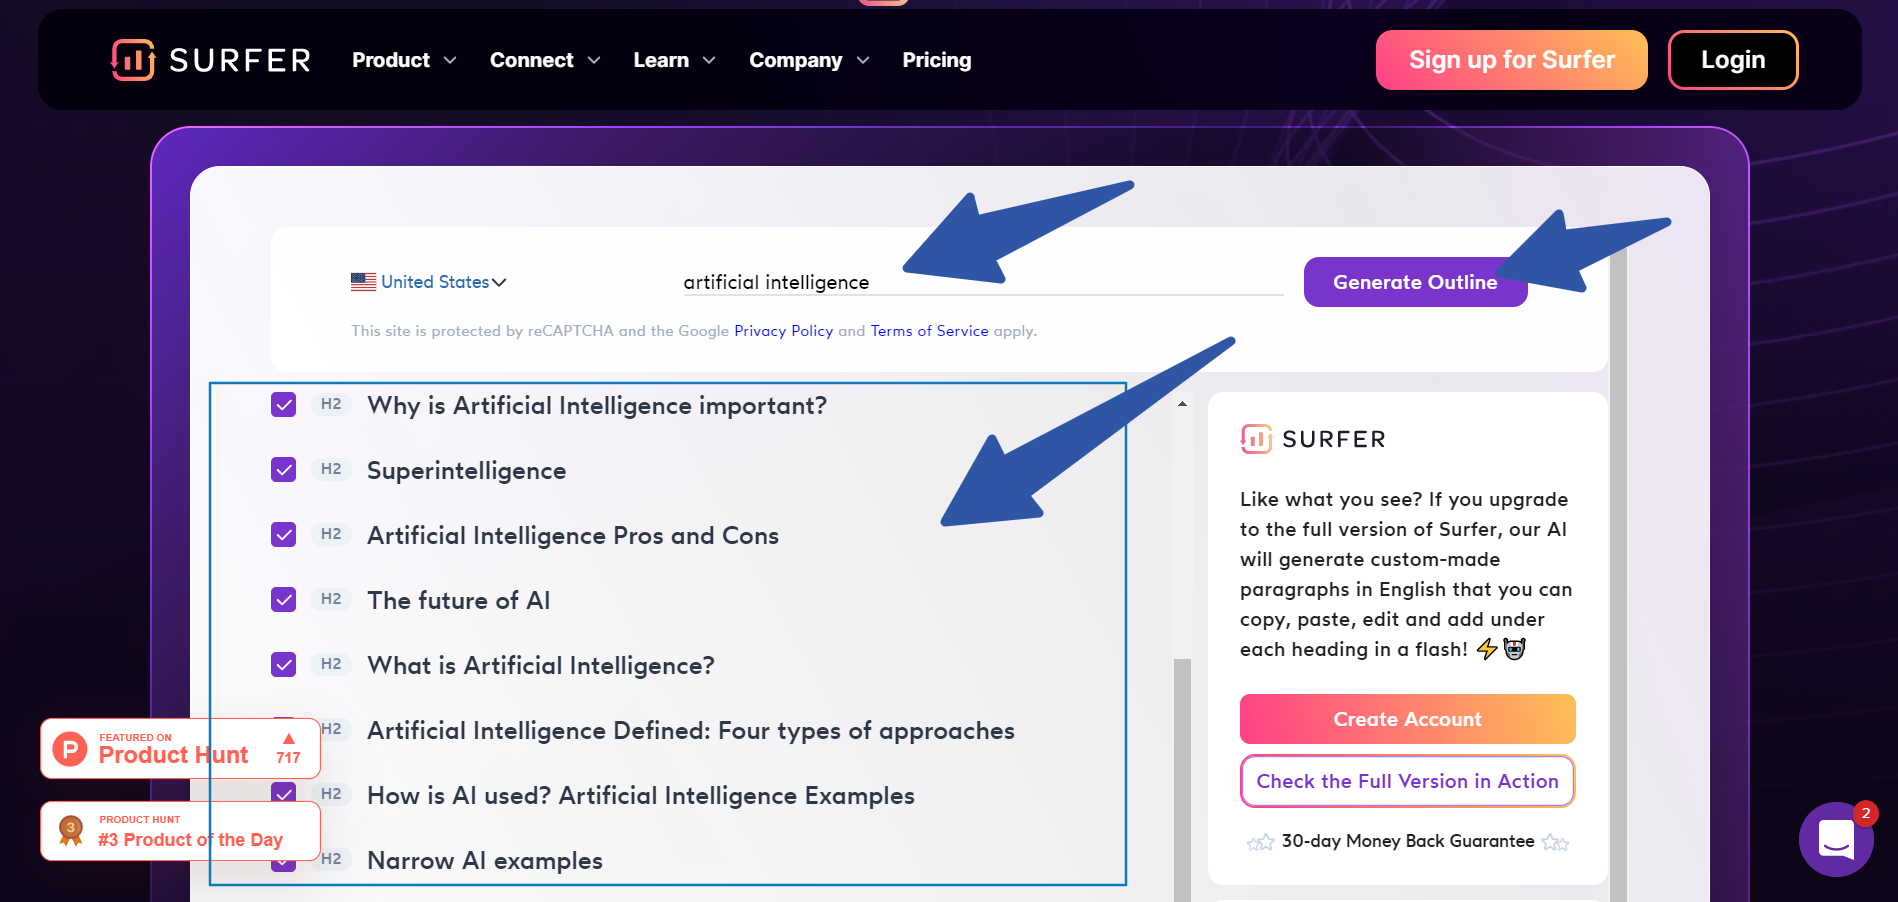 SurferSEO's AI article outline generator